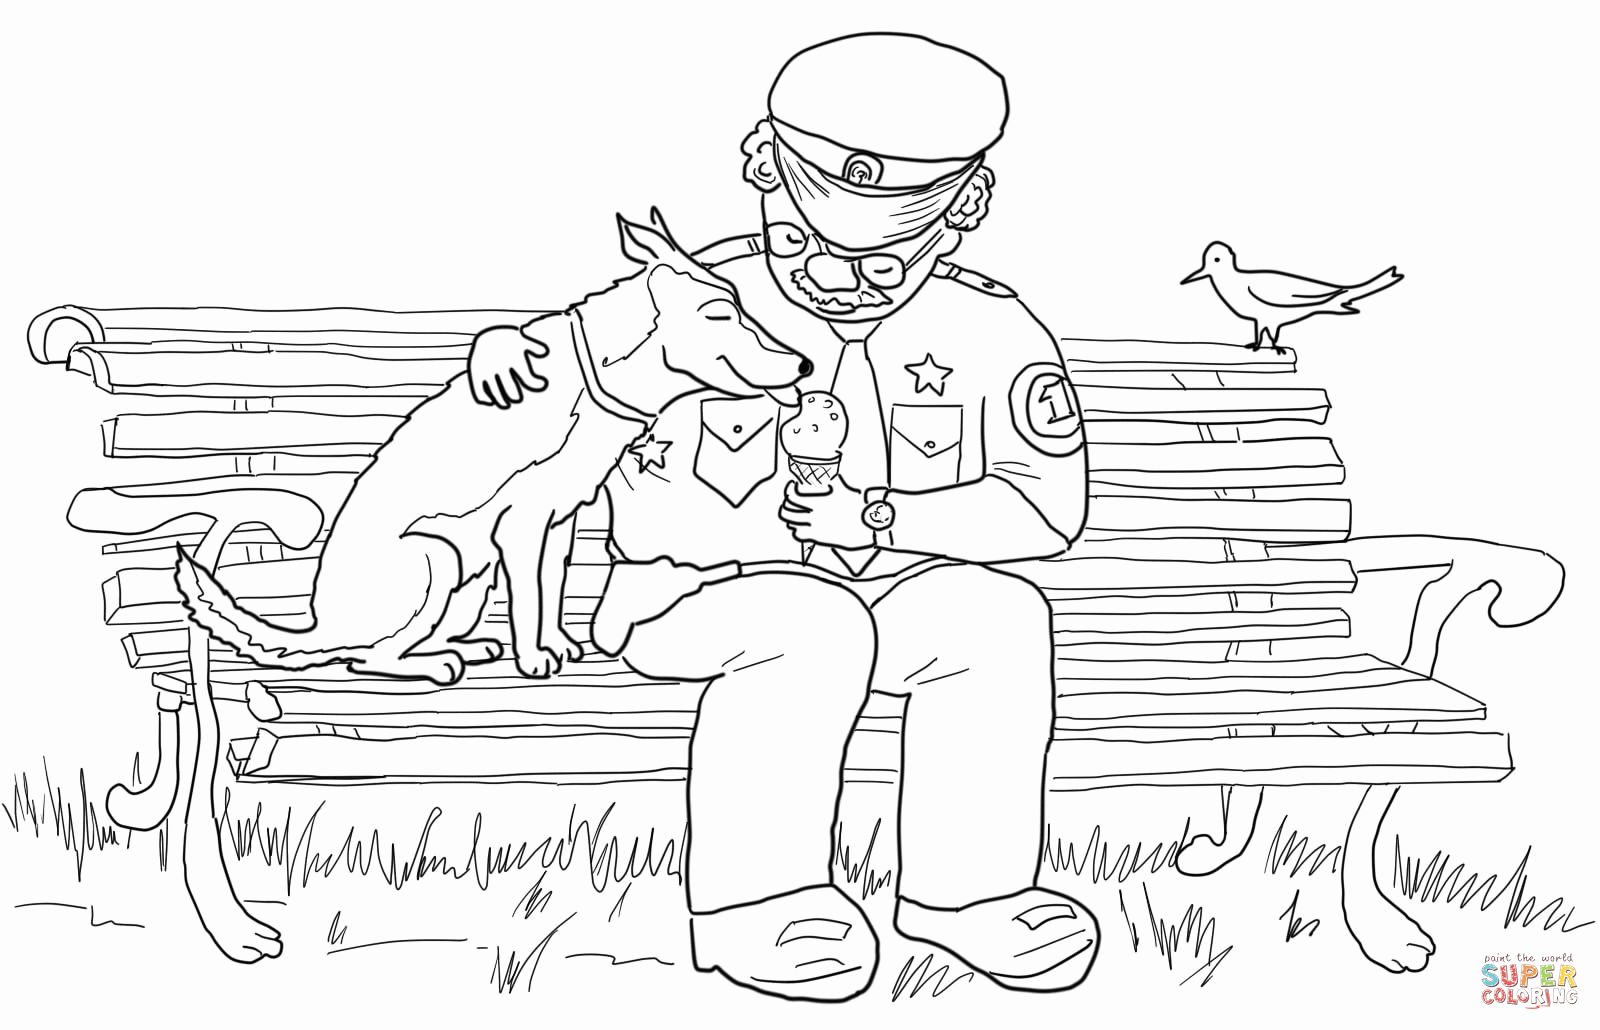 Officer Buckle feeding ice cream to gloria the dog at the park coloring page